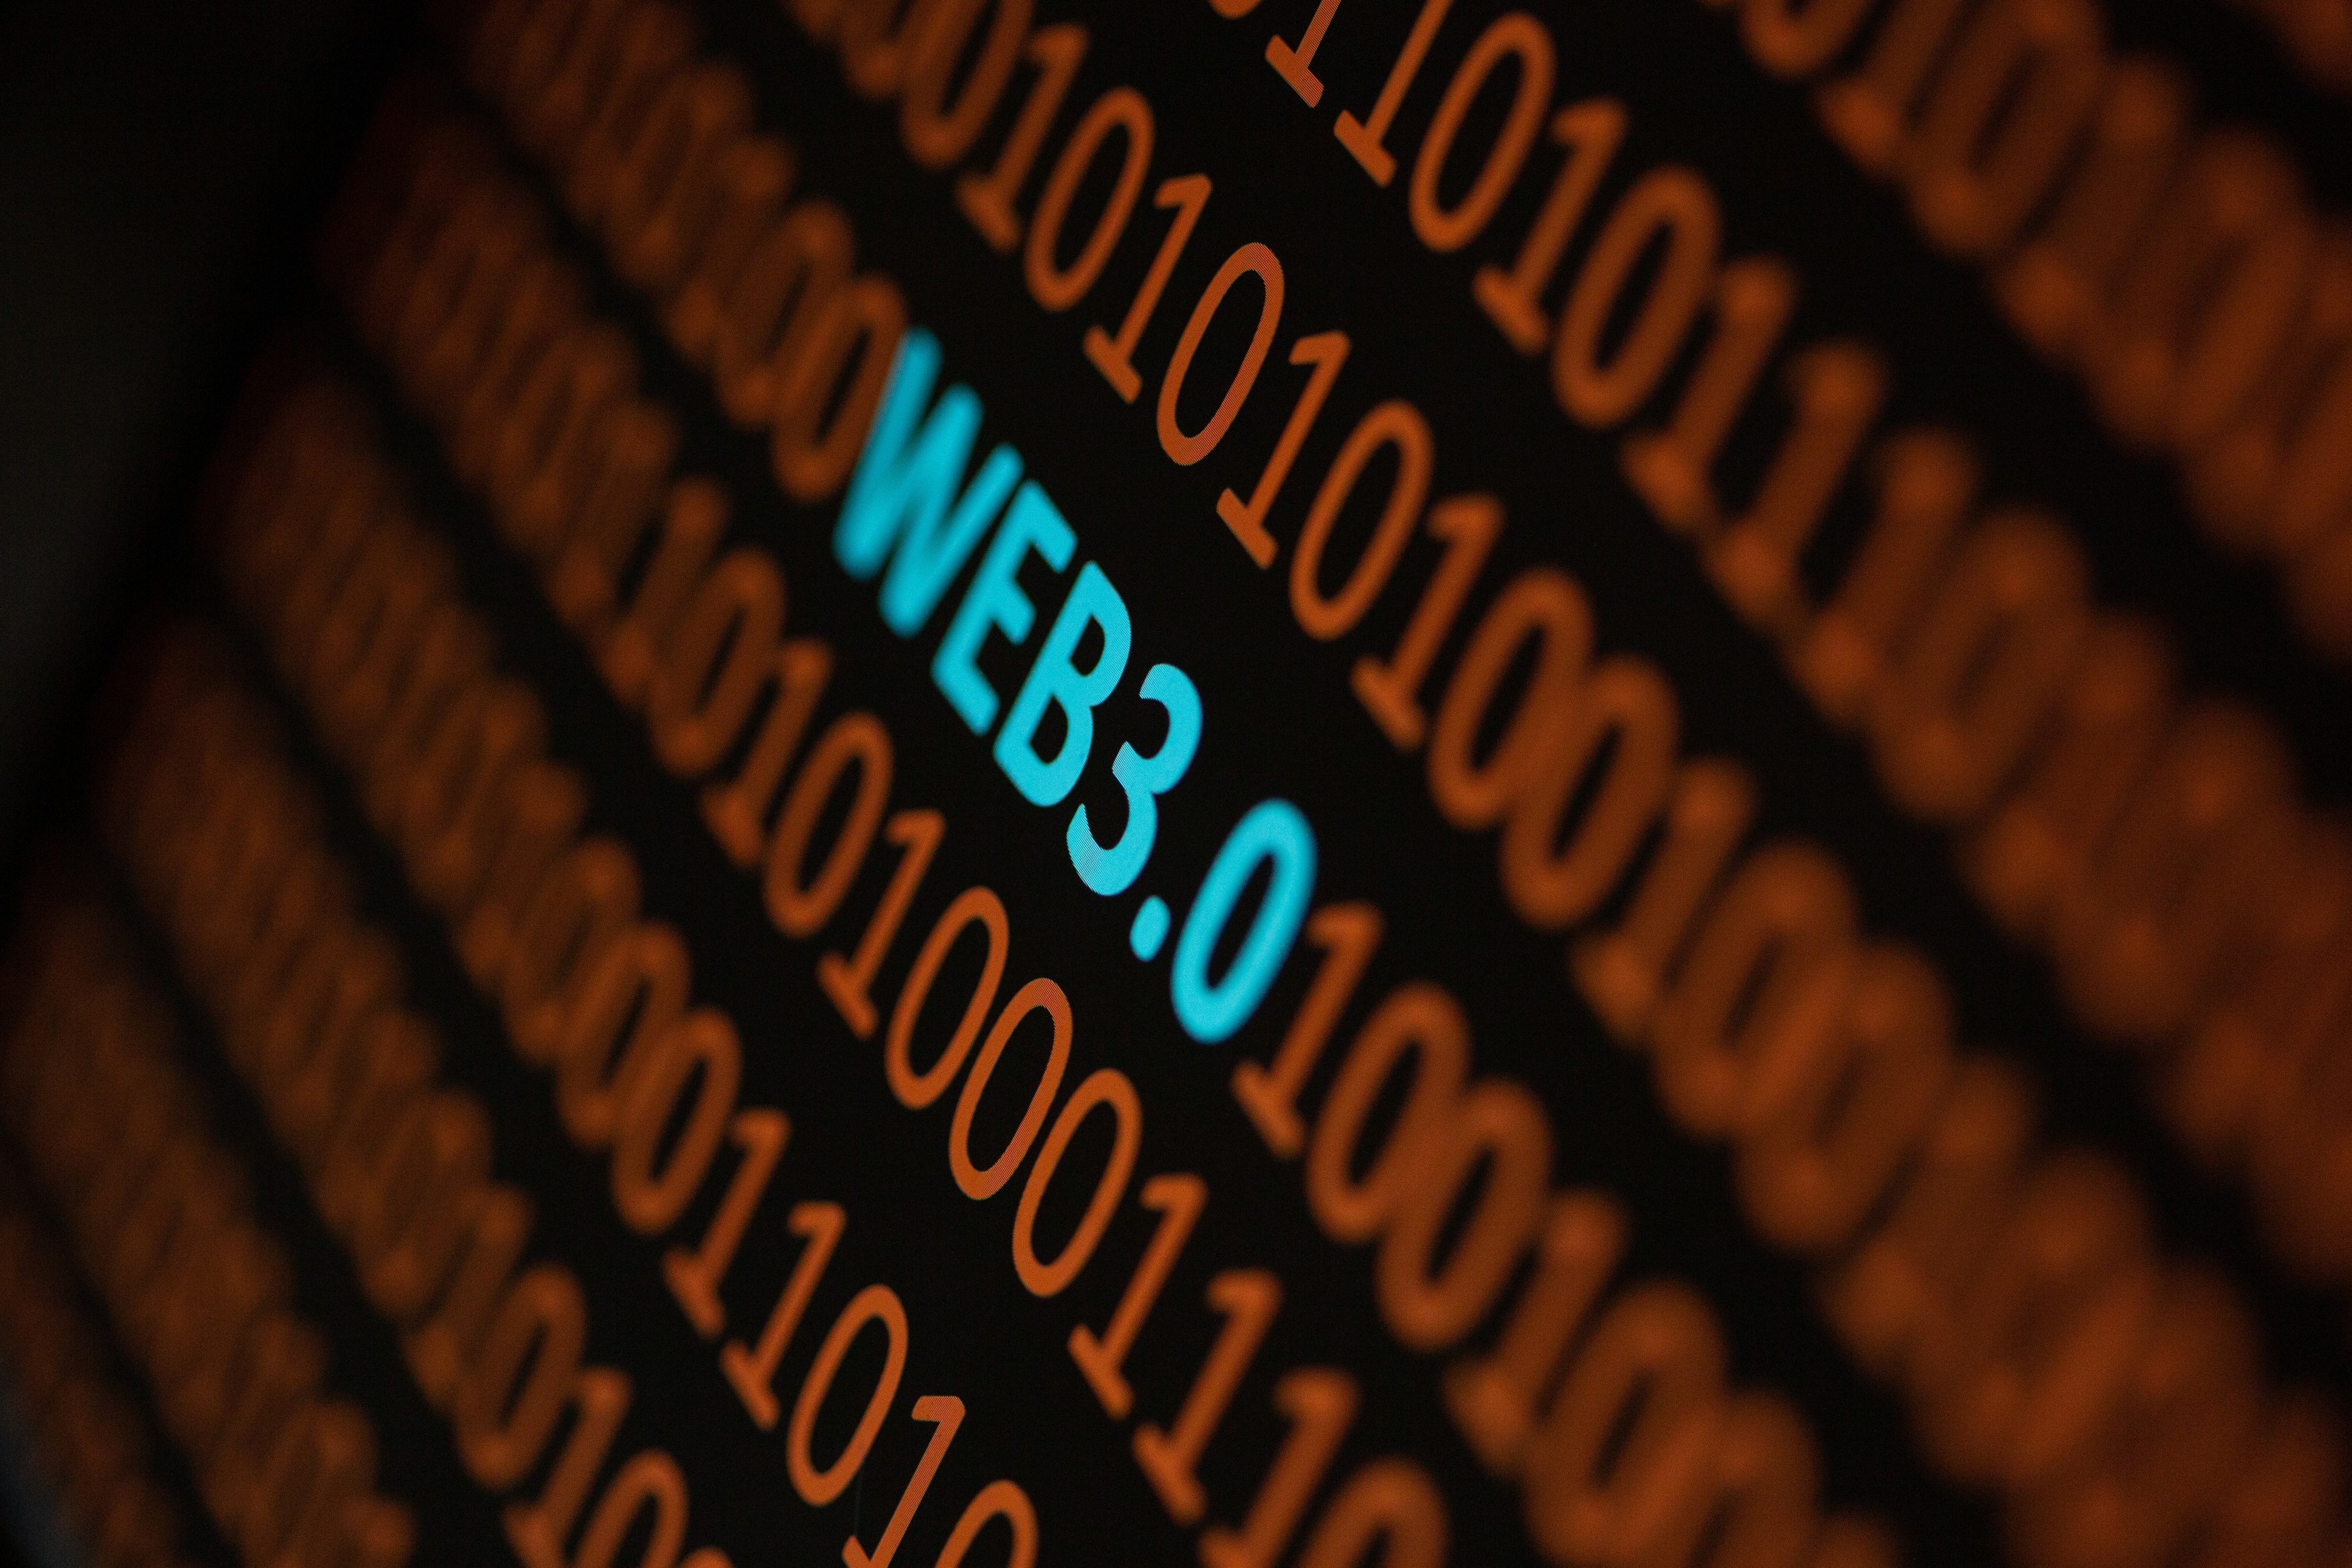 The reputation of Web3 has taken a beating after the collapse of the cryptocurrency exchange FTX, but the term is used to encompass a lot more than just crypto tokens. Photo: Shutterstock